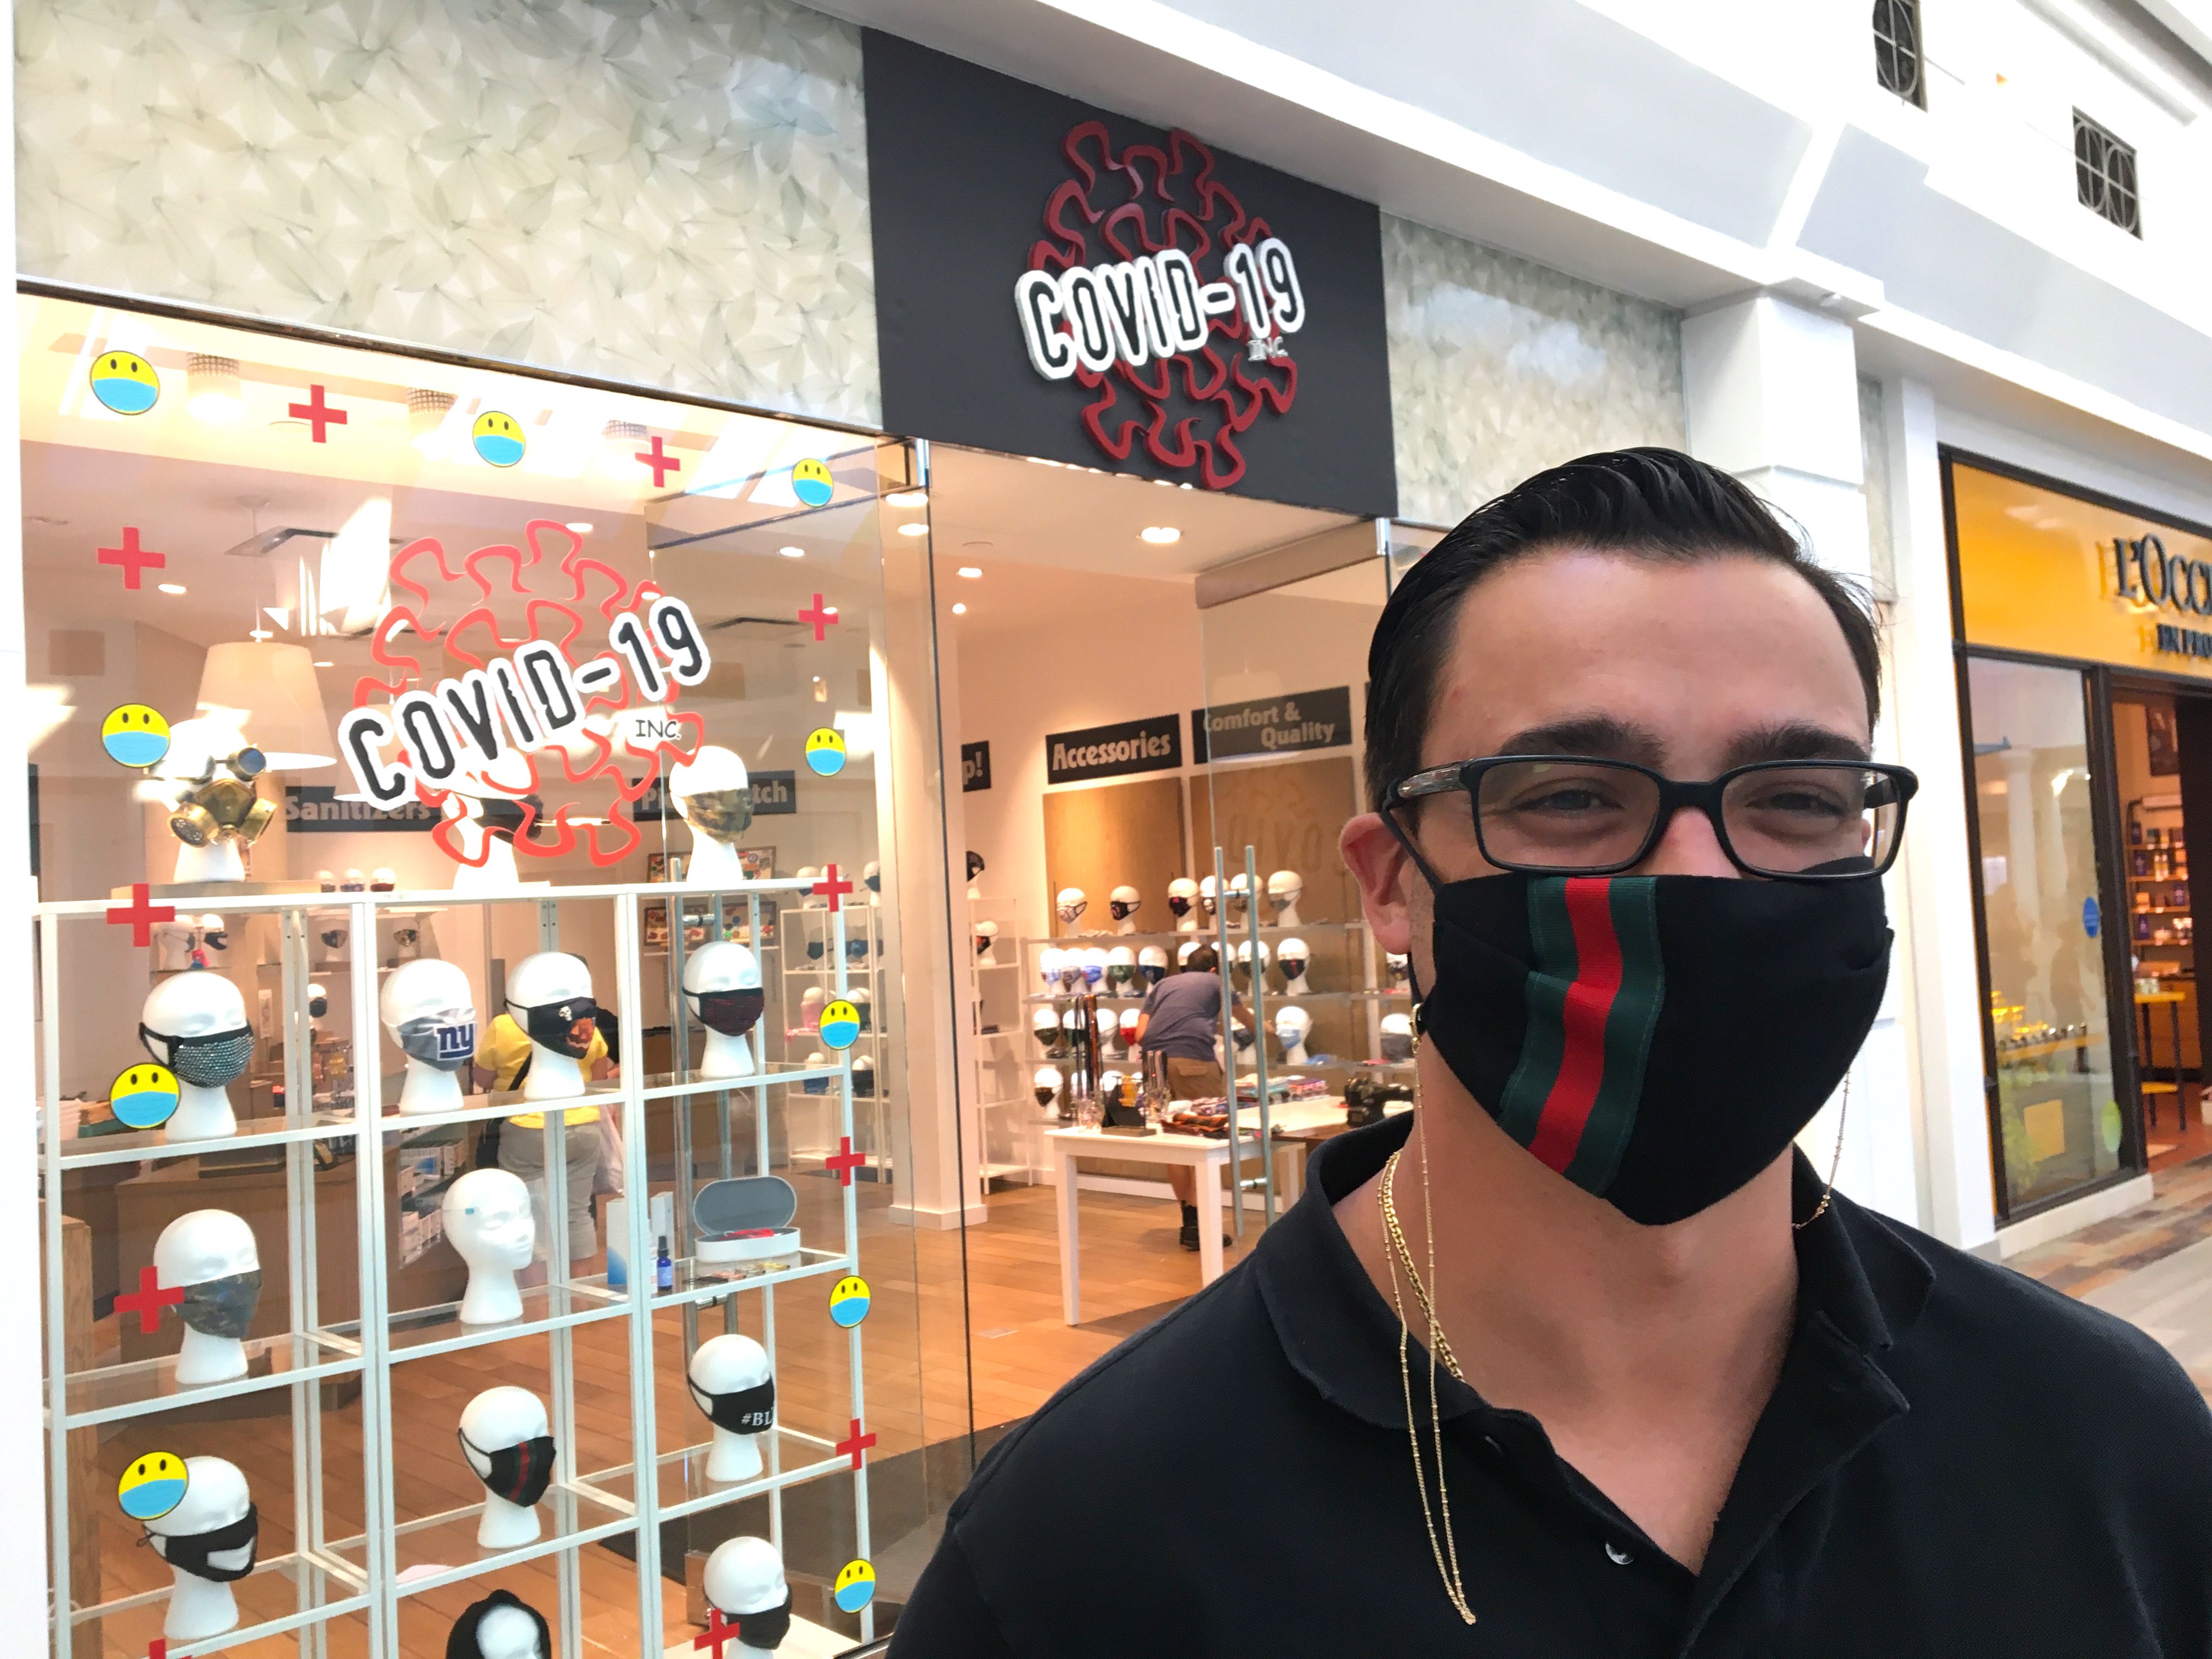 COVID-19 Pop-Up Shop Opens in Short Hills Mall, Selling Pandemic Supplies